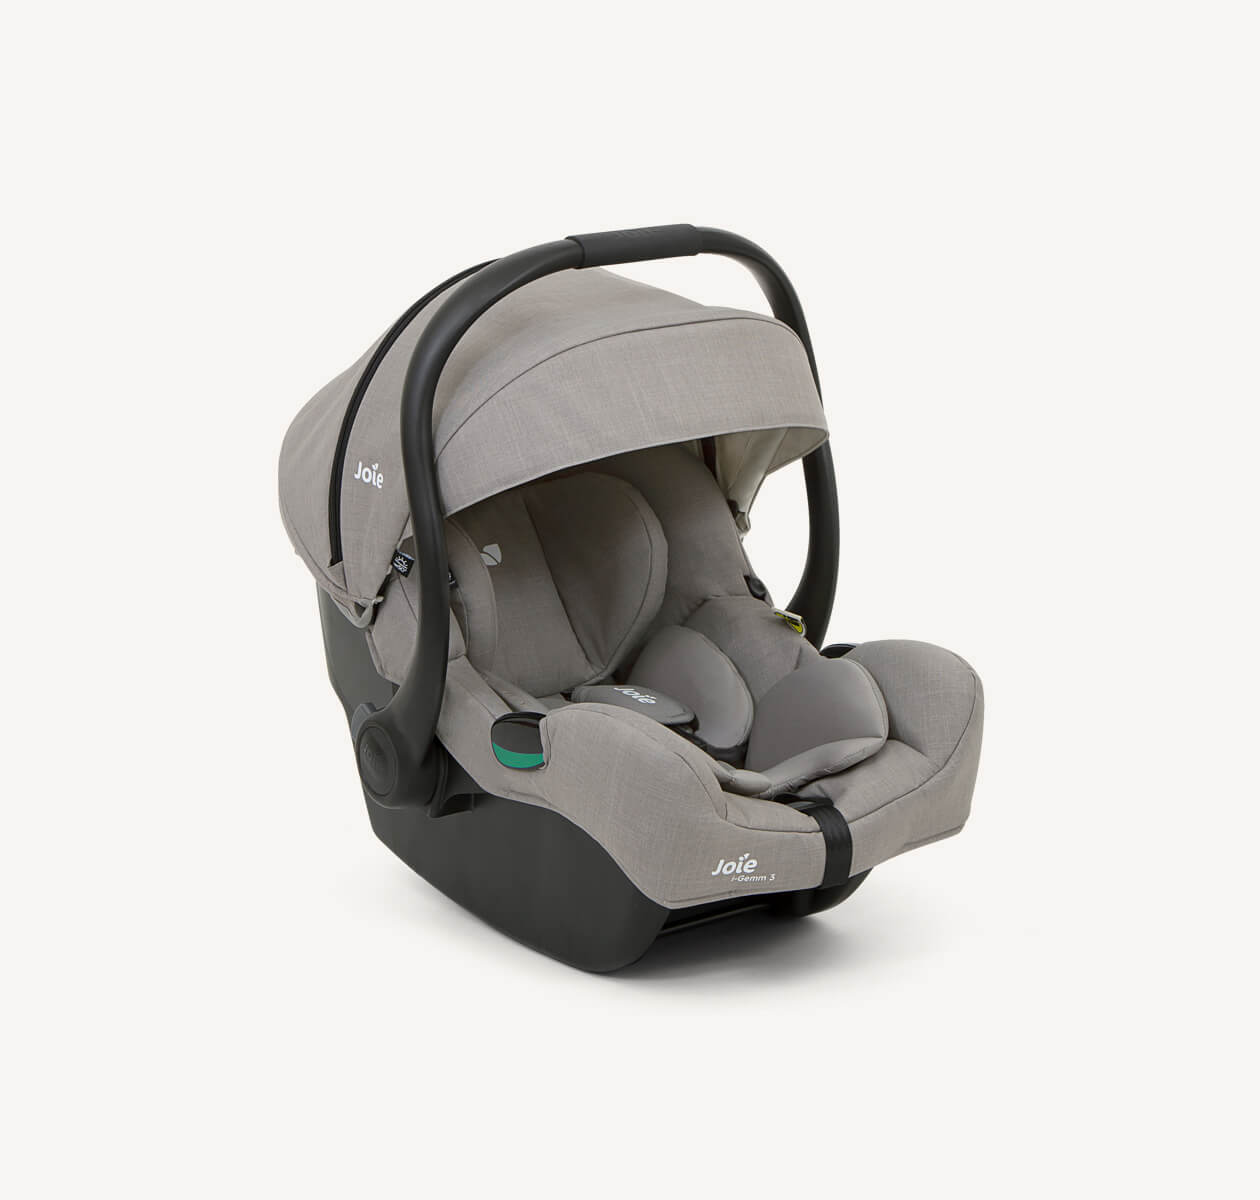 Joie I-gemm3 baby car seat in gray positioned at a right angle.